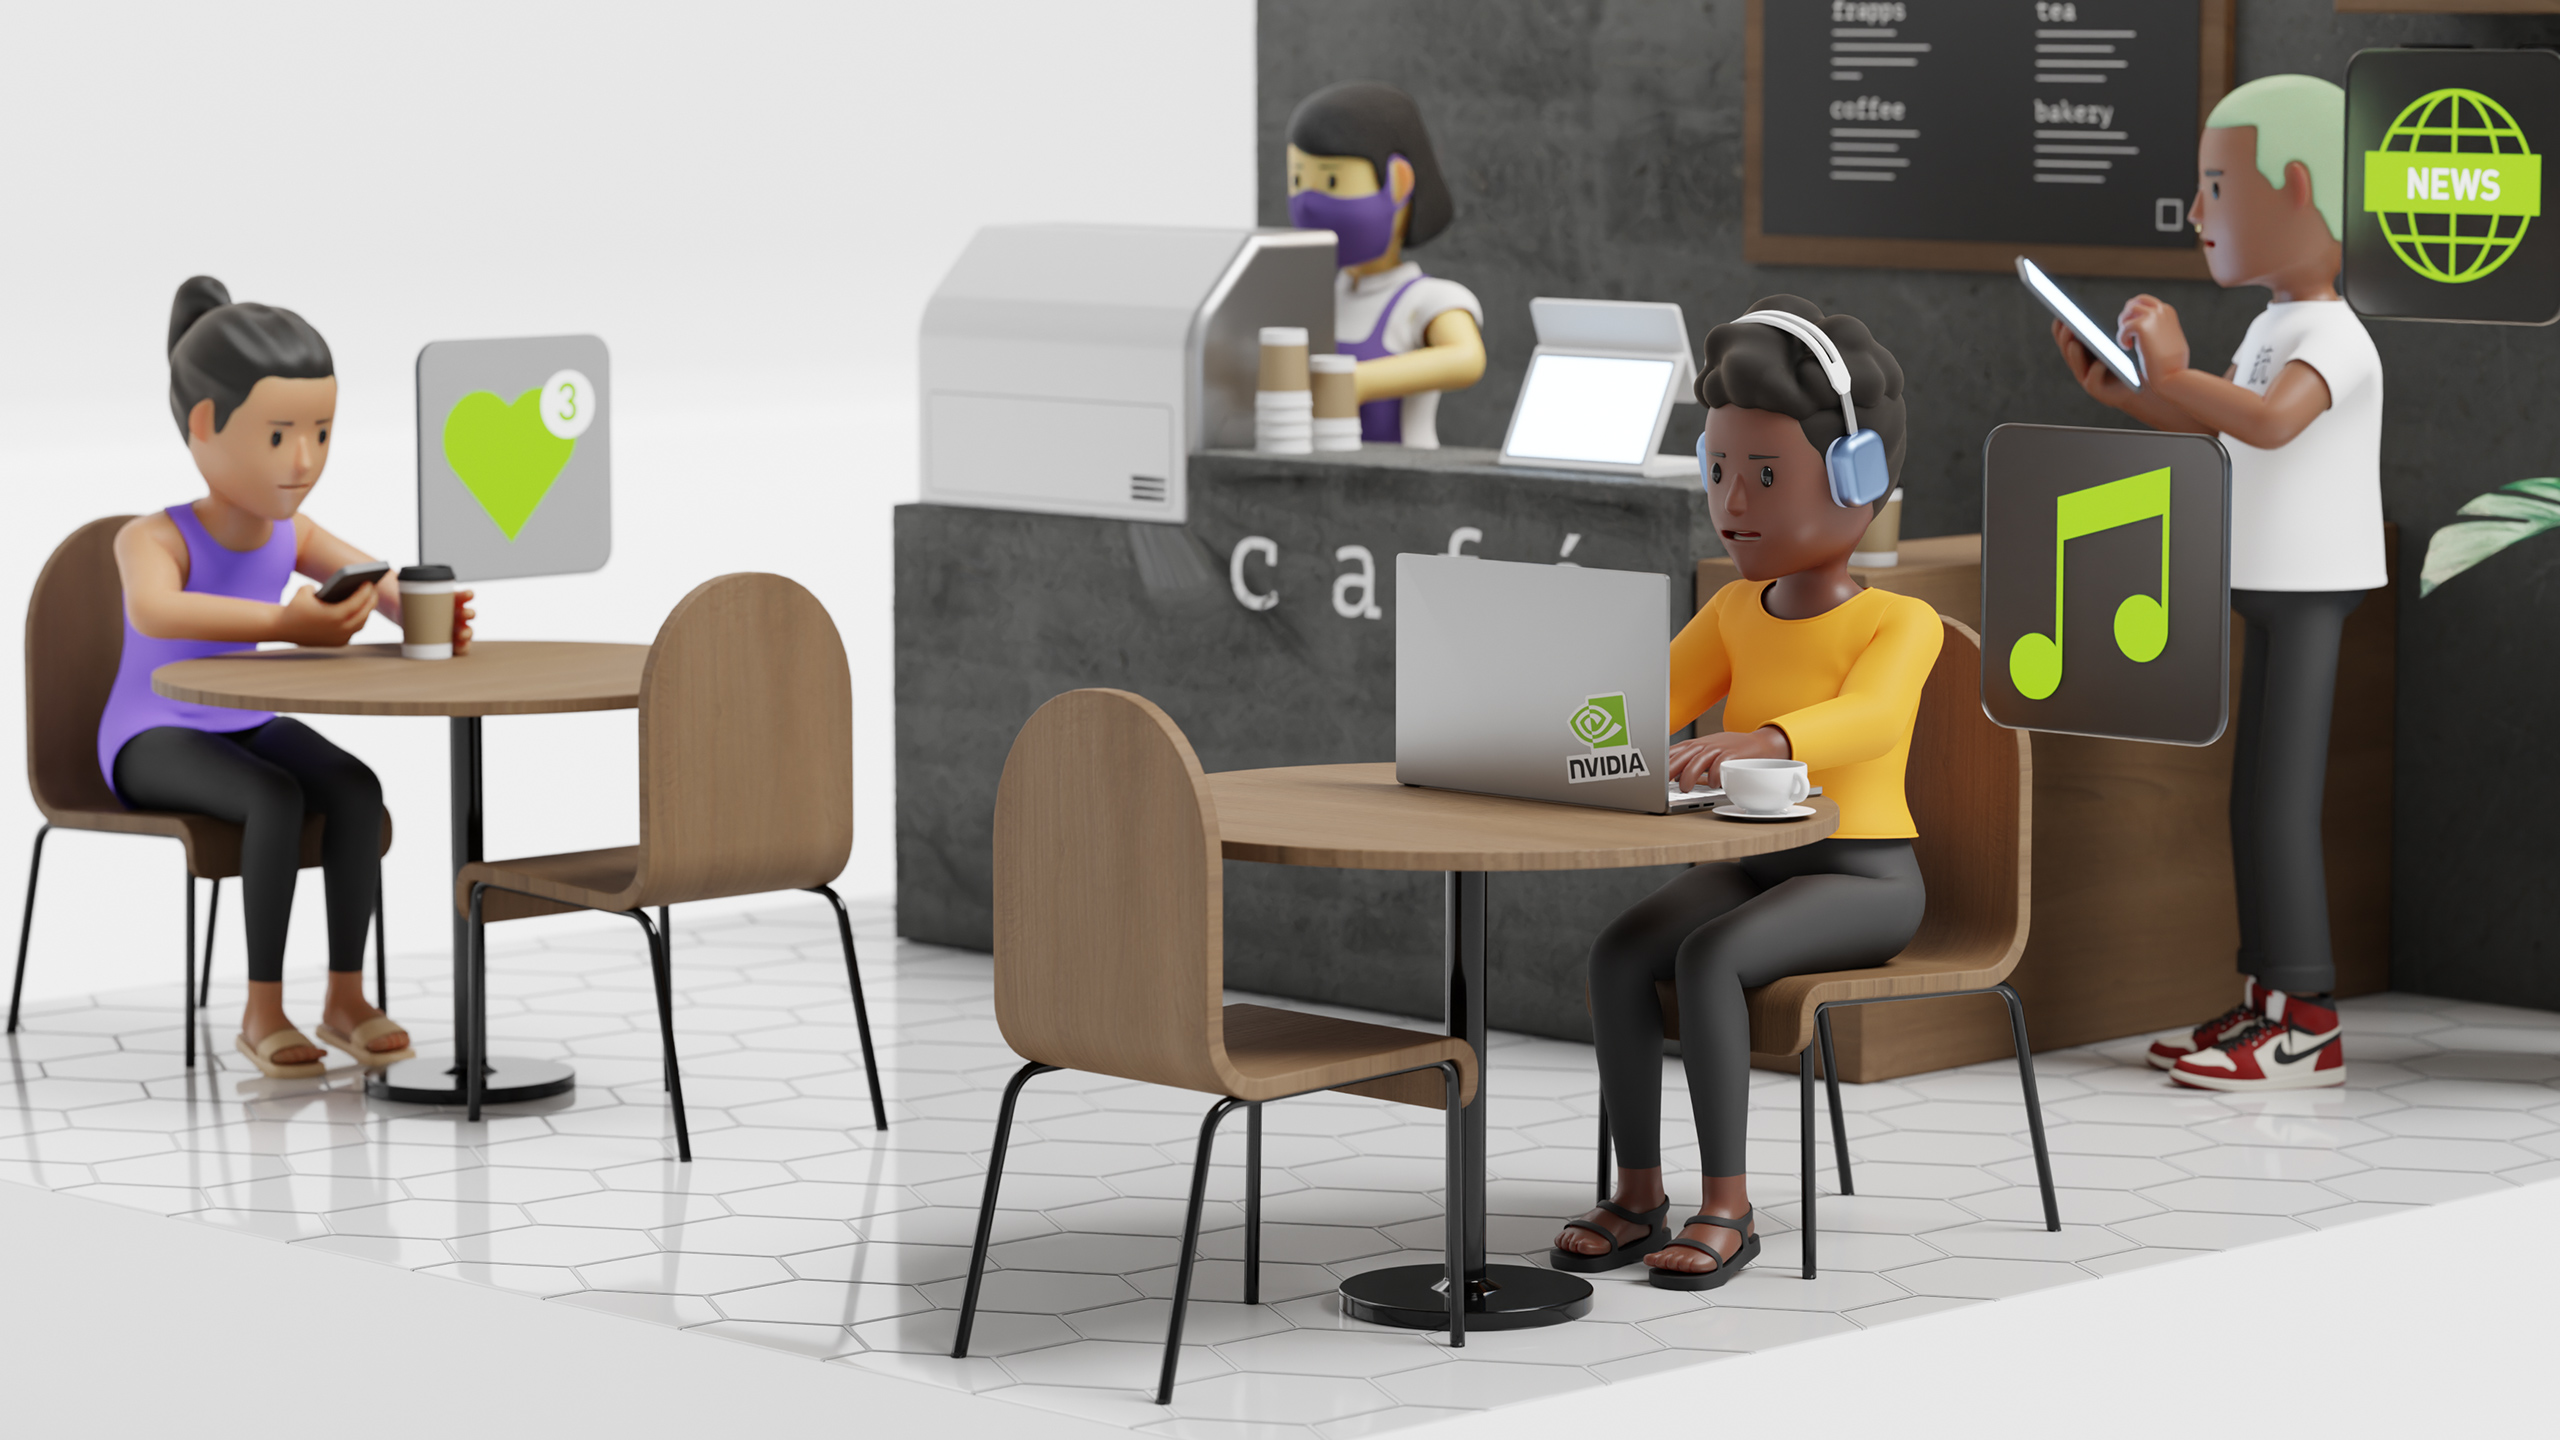 Graphic of people sitting at a cafe listening to music, reading news, and texting.